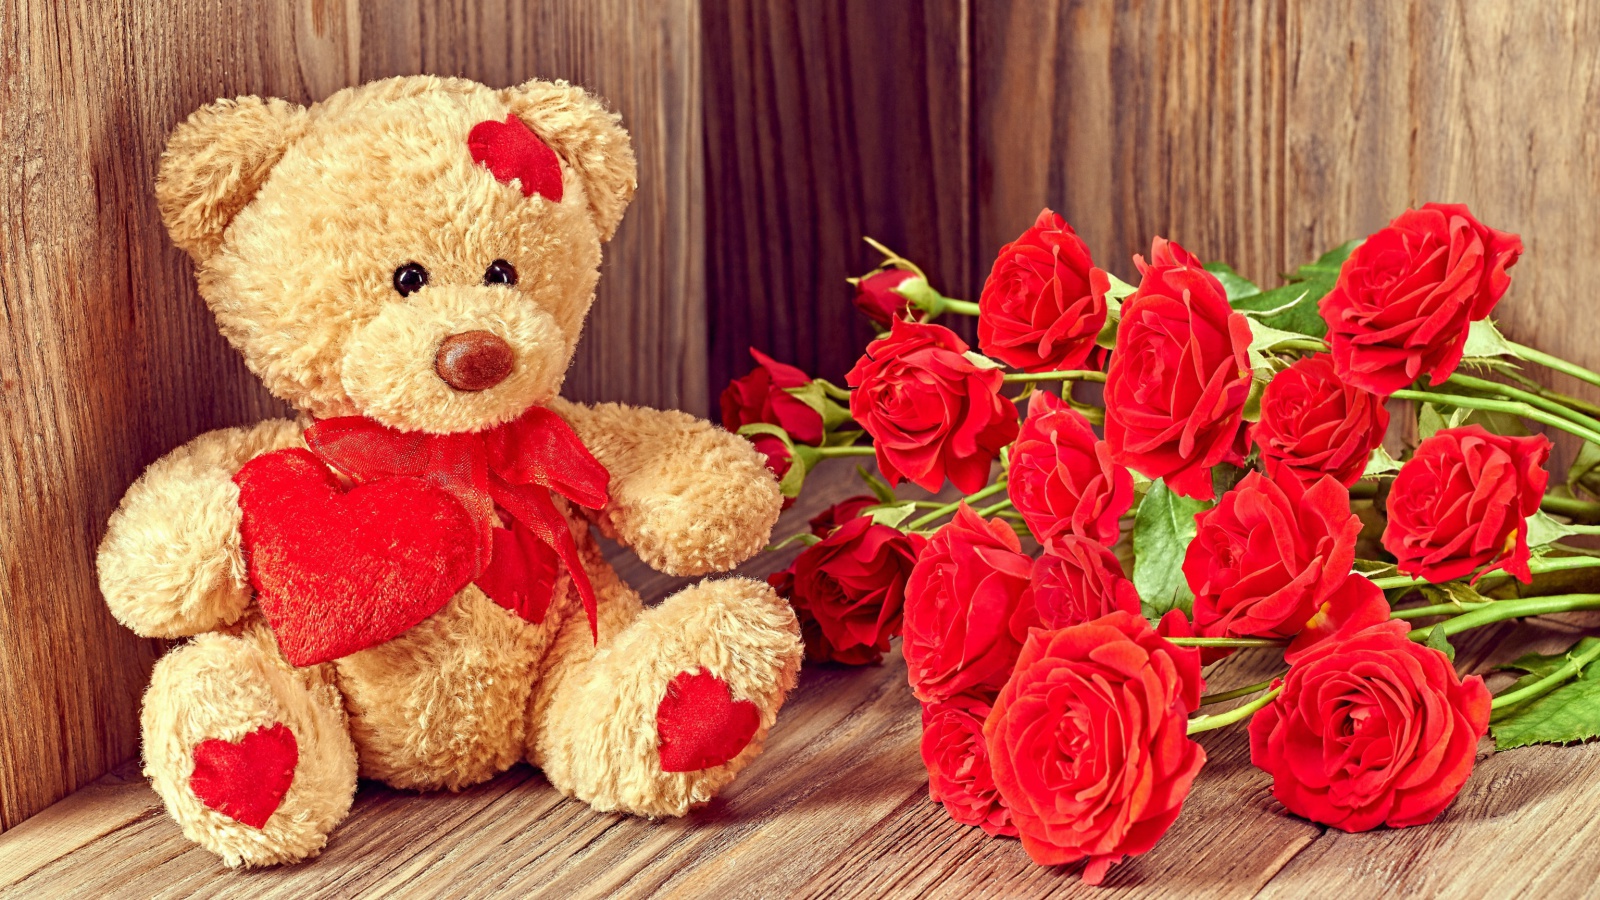 Brodwn Teddy Bear Gift for Saint Valentines Day wallpaper 1600x900